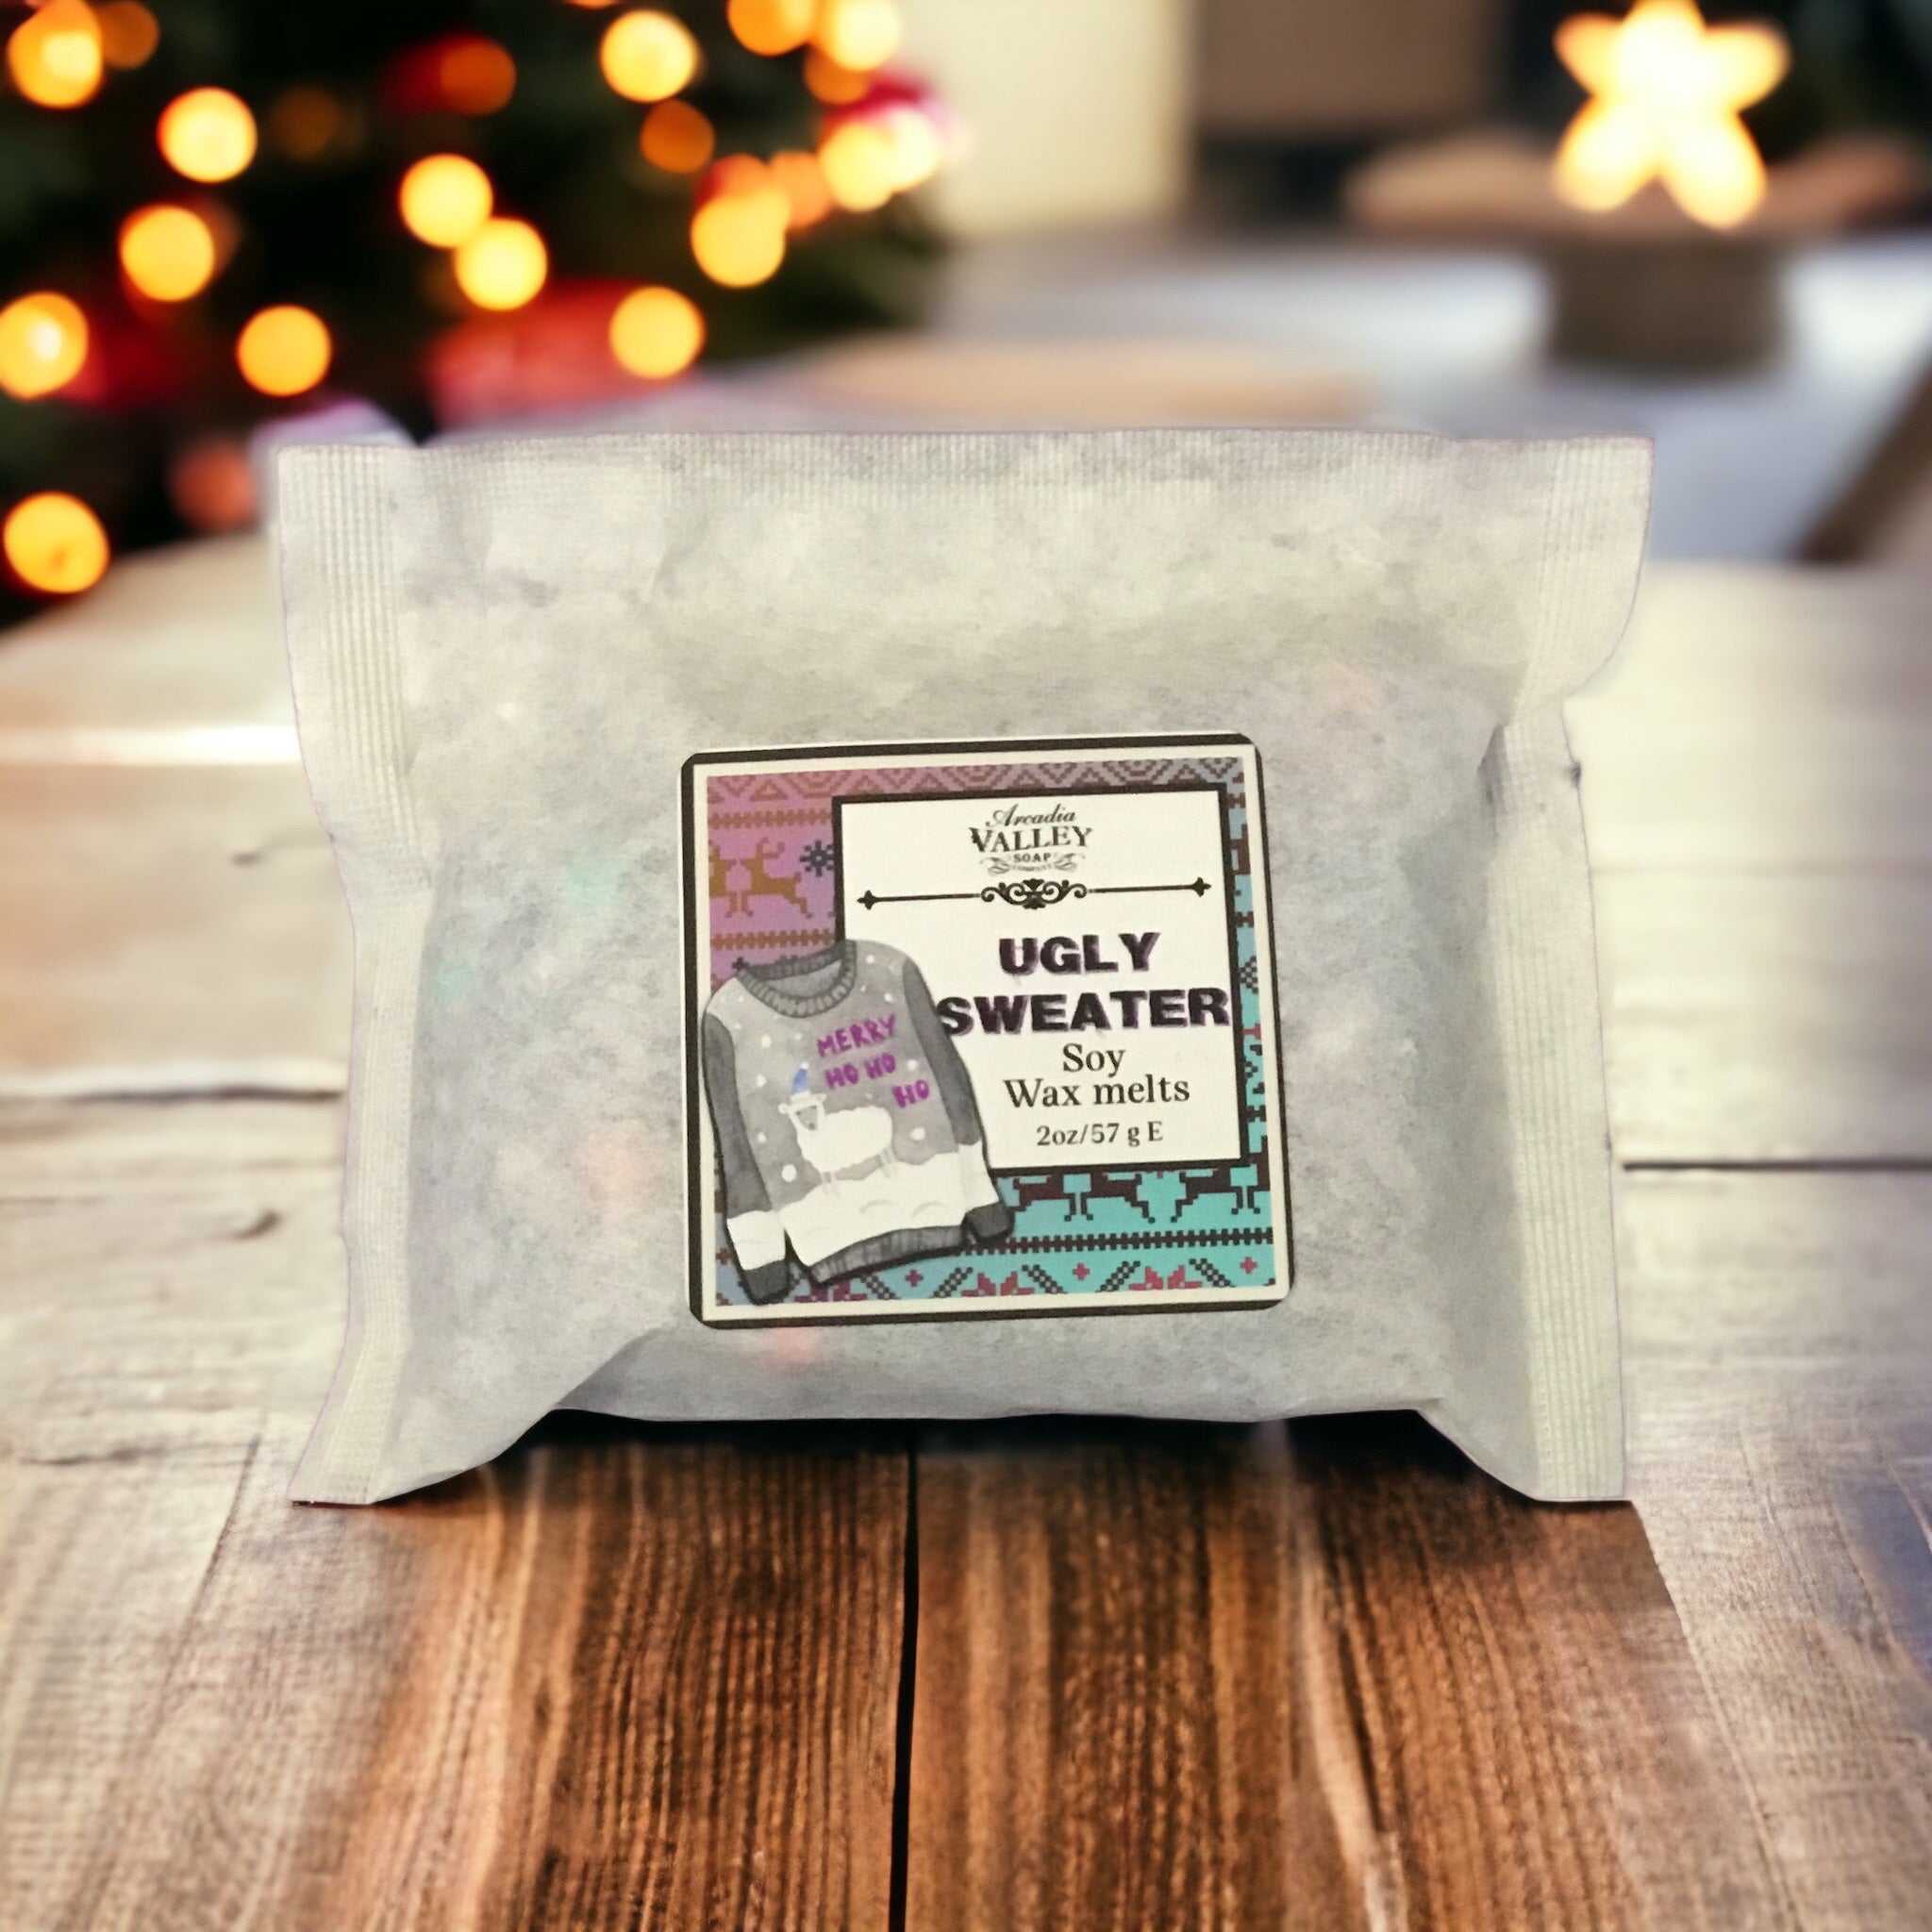 Packed soy wax melts in a white, lightweight paper pouch and with a decorative label on a wooden table with Christmas lights in the background for display